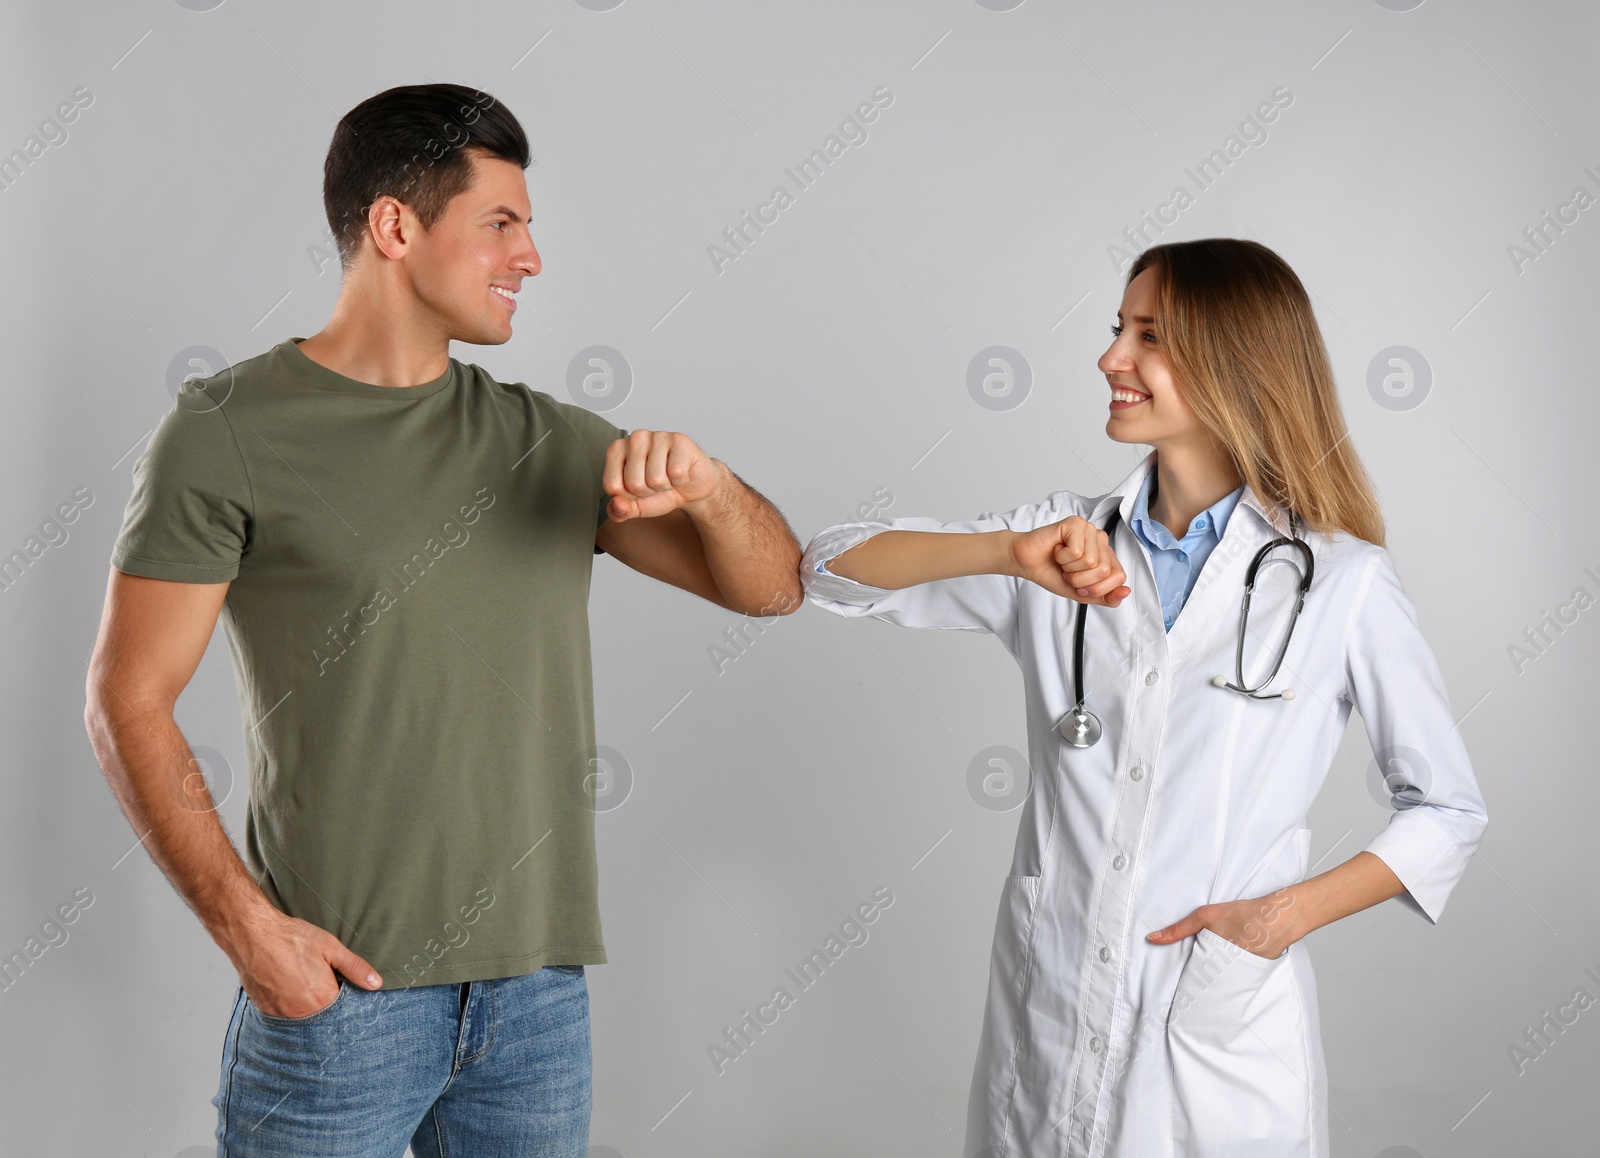 Photo of Doctor and patient doing elbow bump instead of handshake on light grey background. New greeting during COVID-19 pandemic